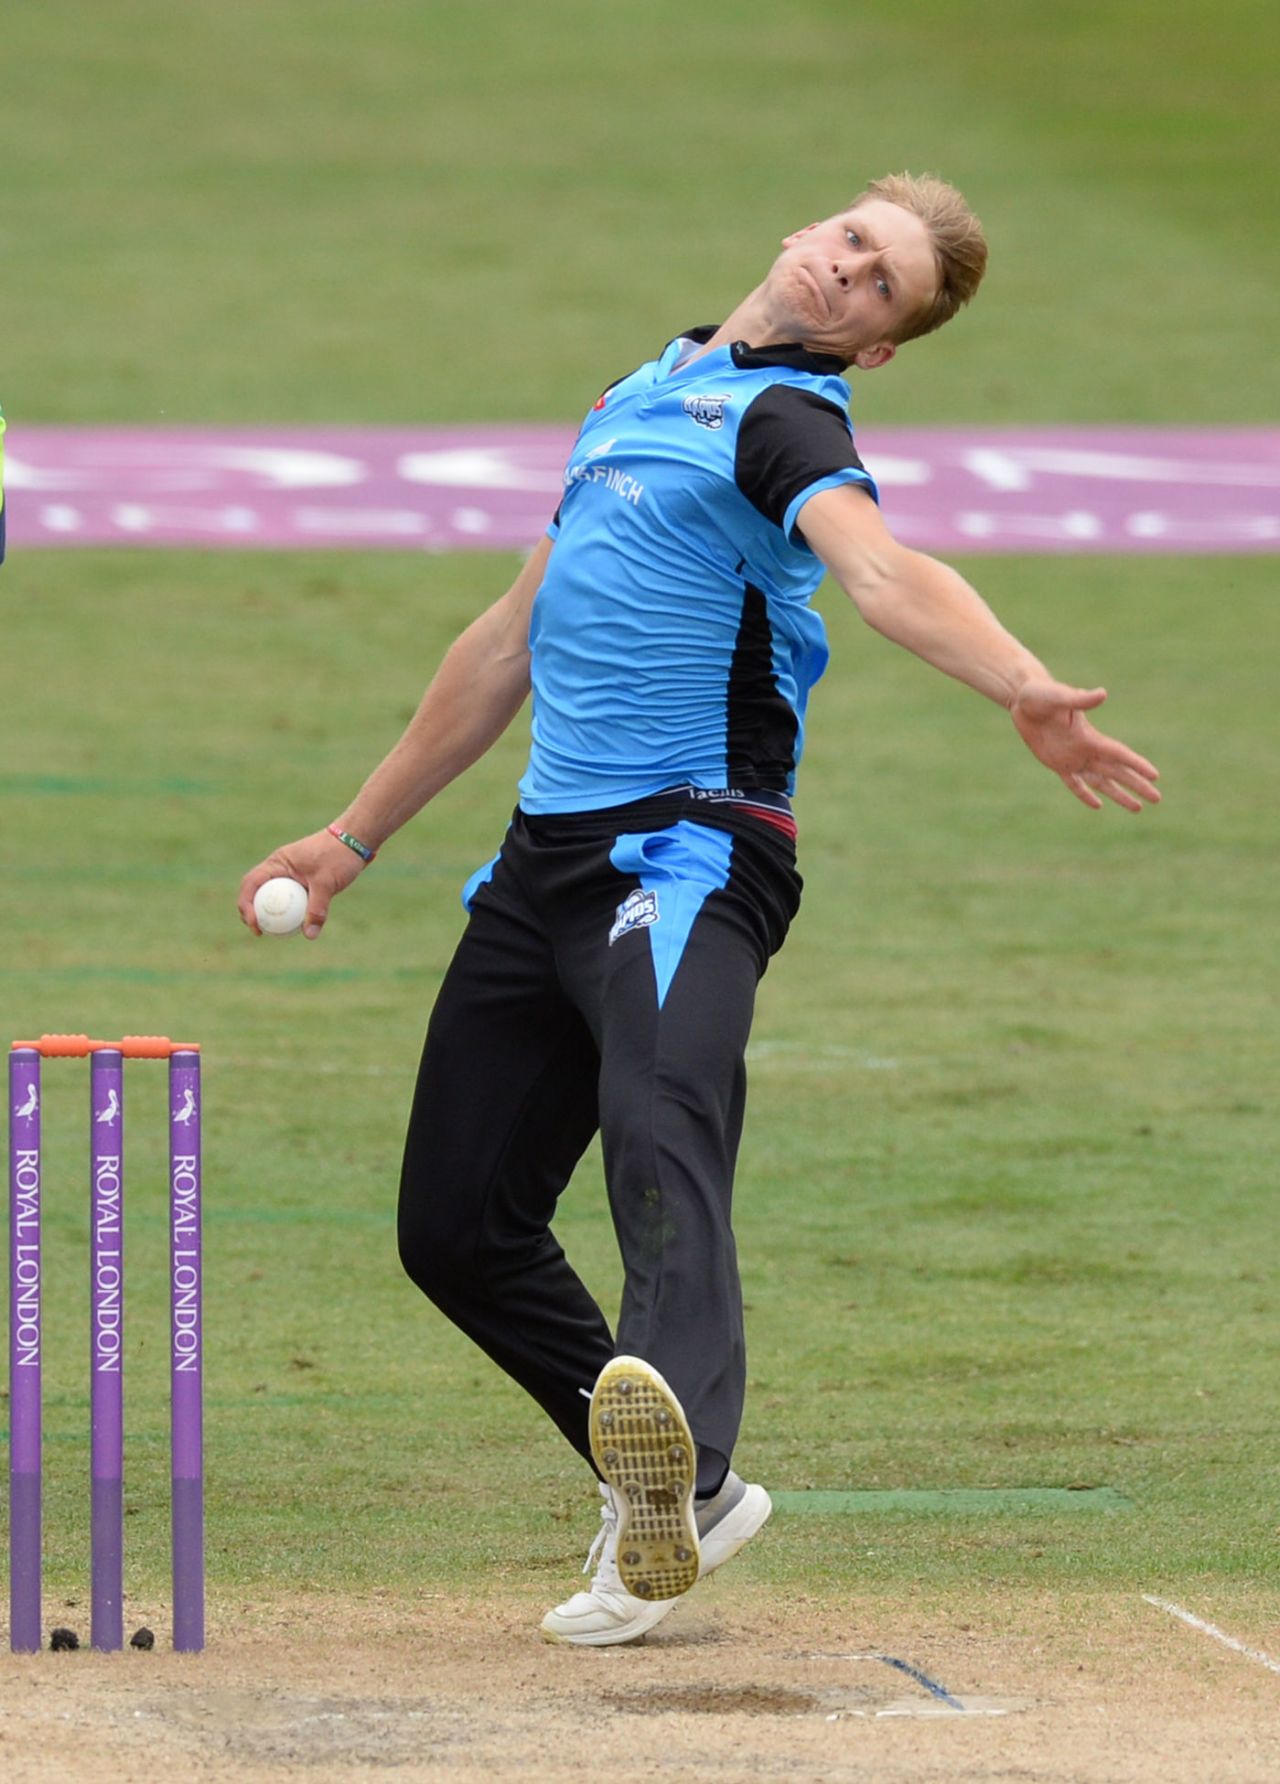 Dillon Pennington is making a good impression at Worcestershire, Royal London Cup semi-final, Worcestershire v Kent, Worcester, June 17, 2018